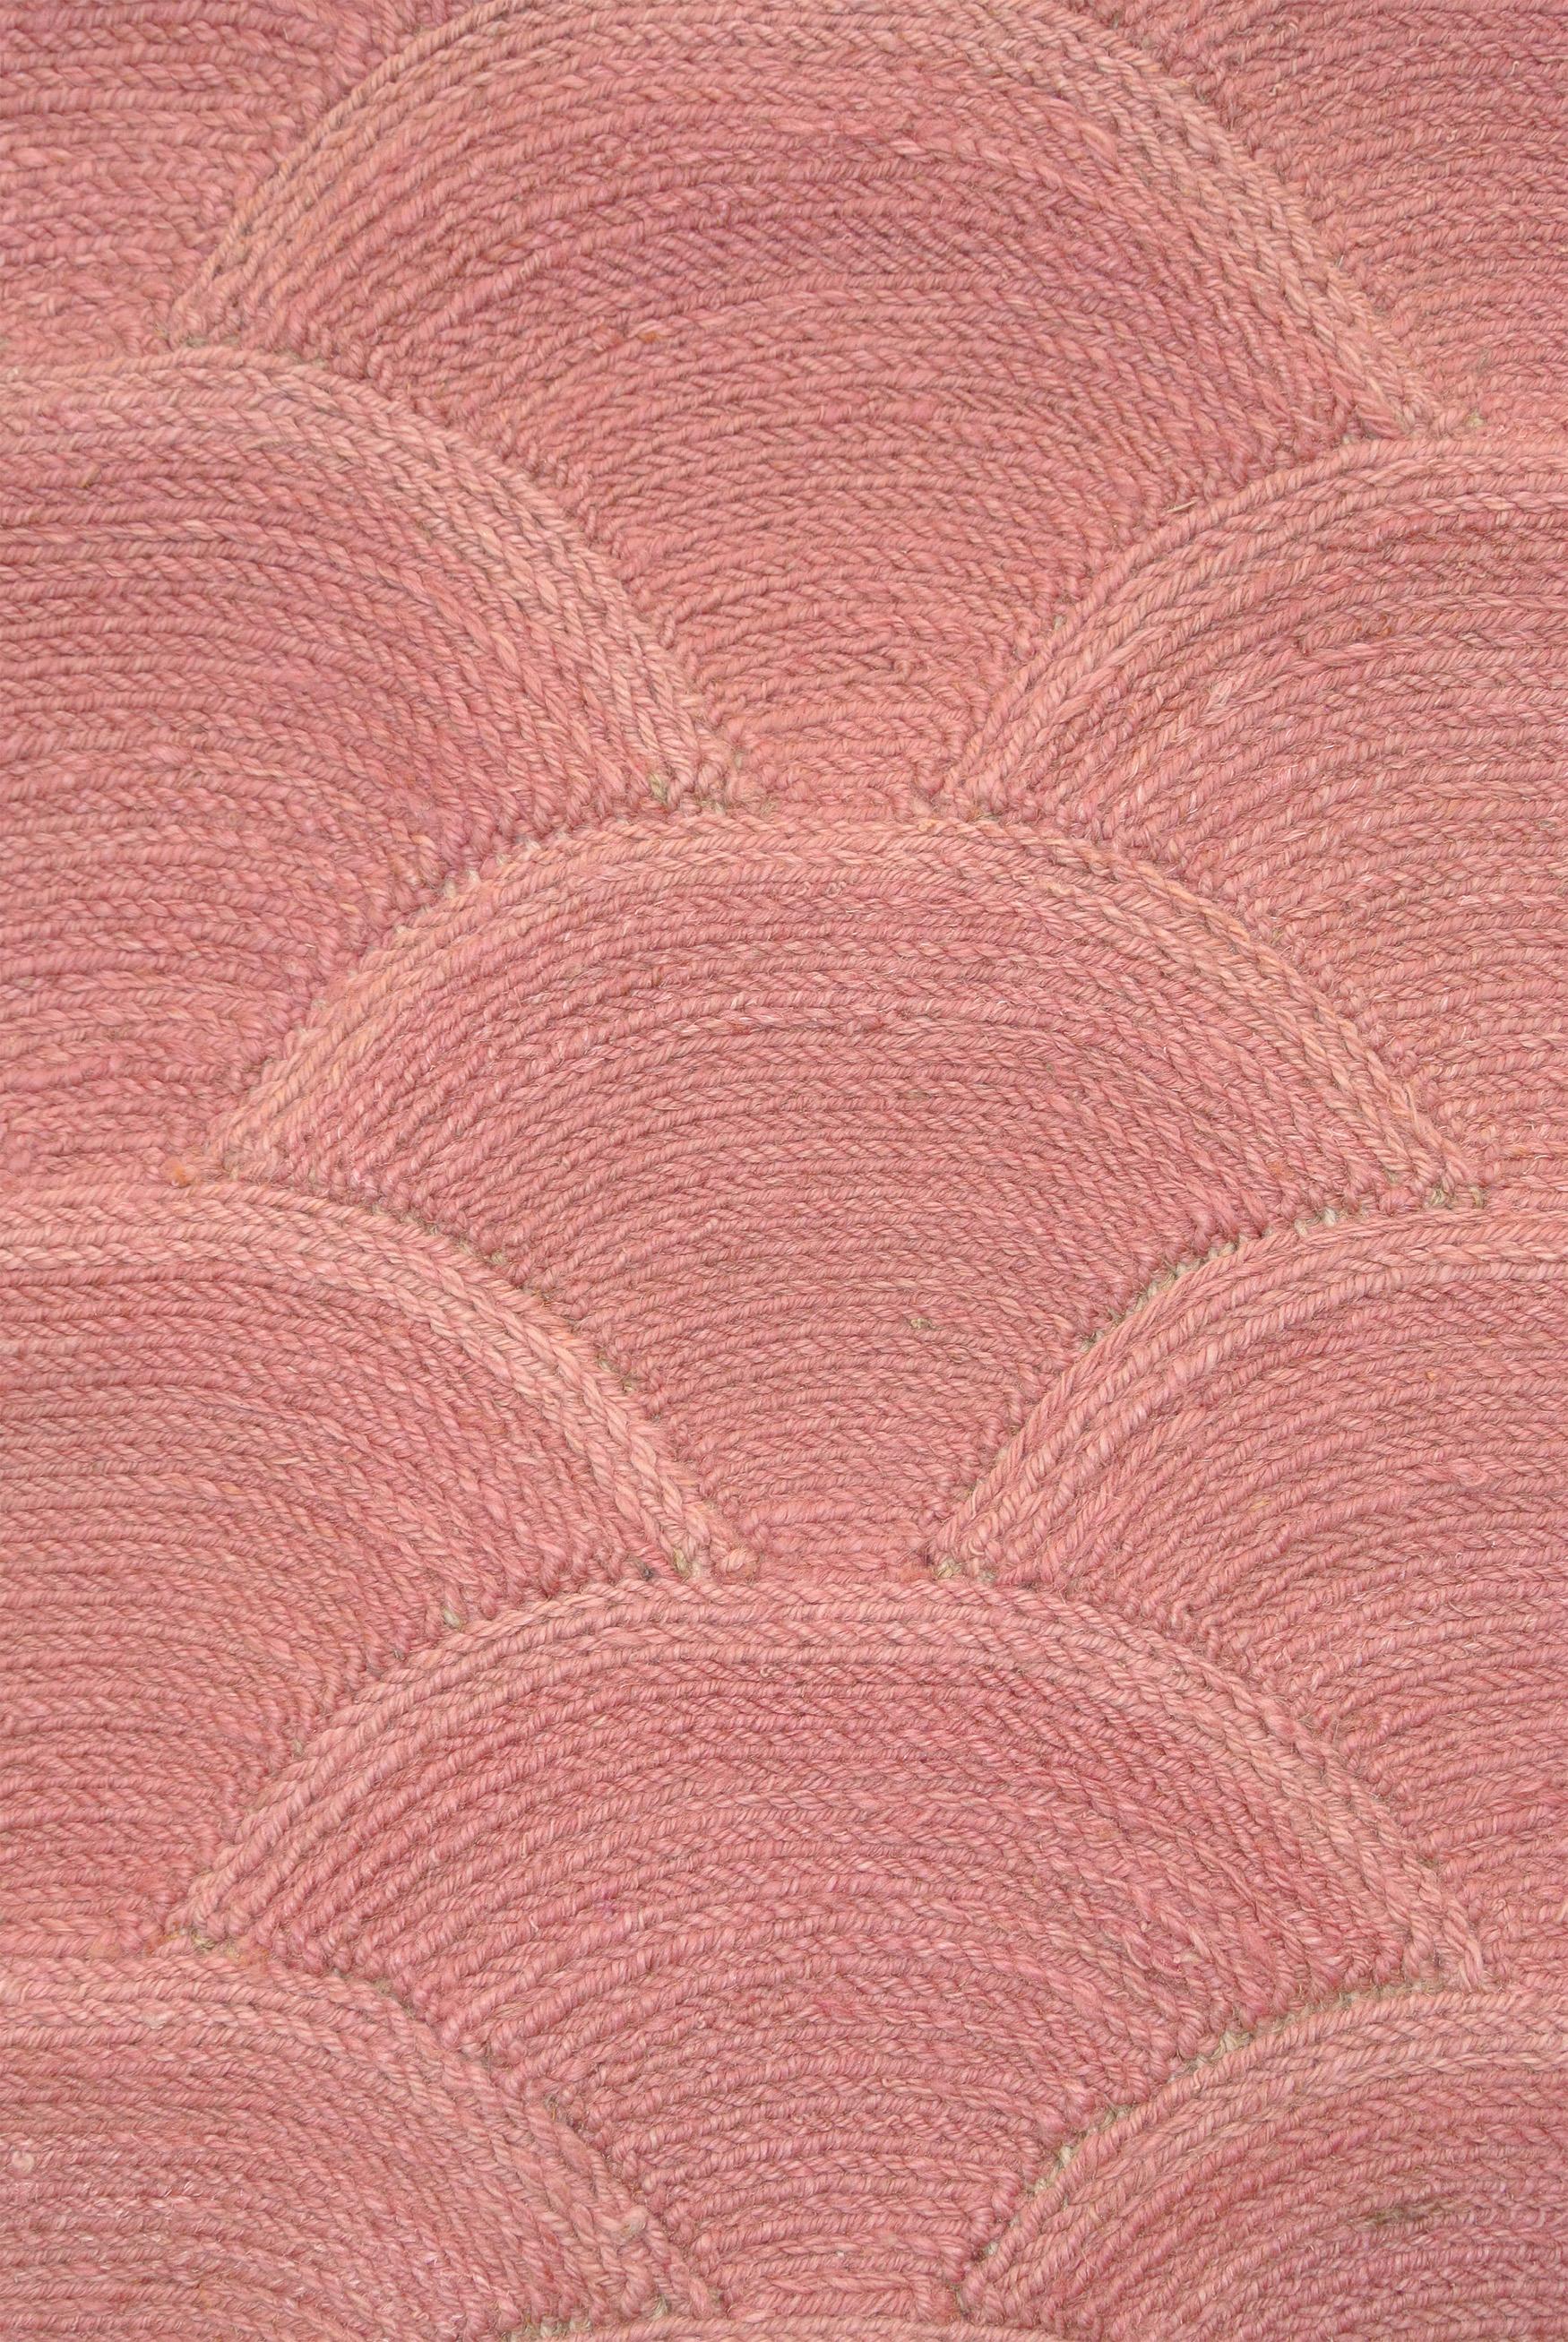 Pink Modern Persian Rug, Wool, Orley Shabahang, 3' x 5' In New Condition For Sale In New York, NY